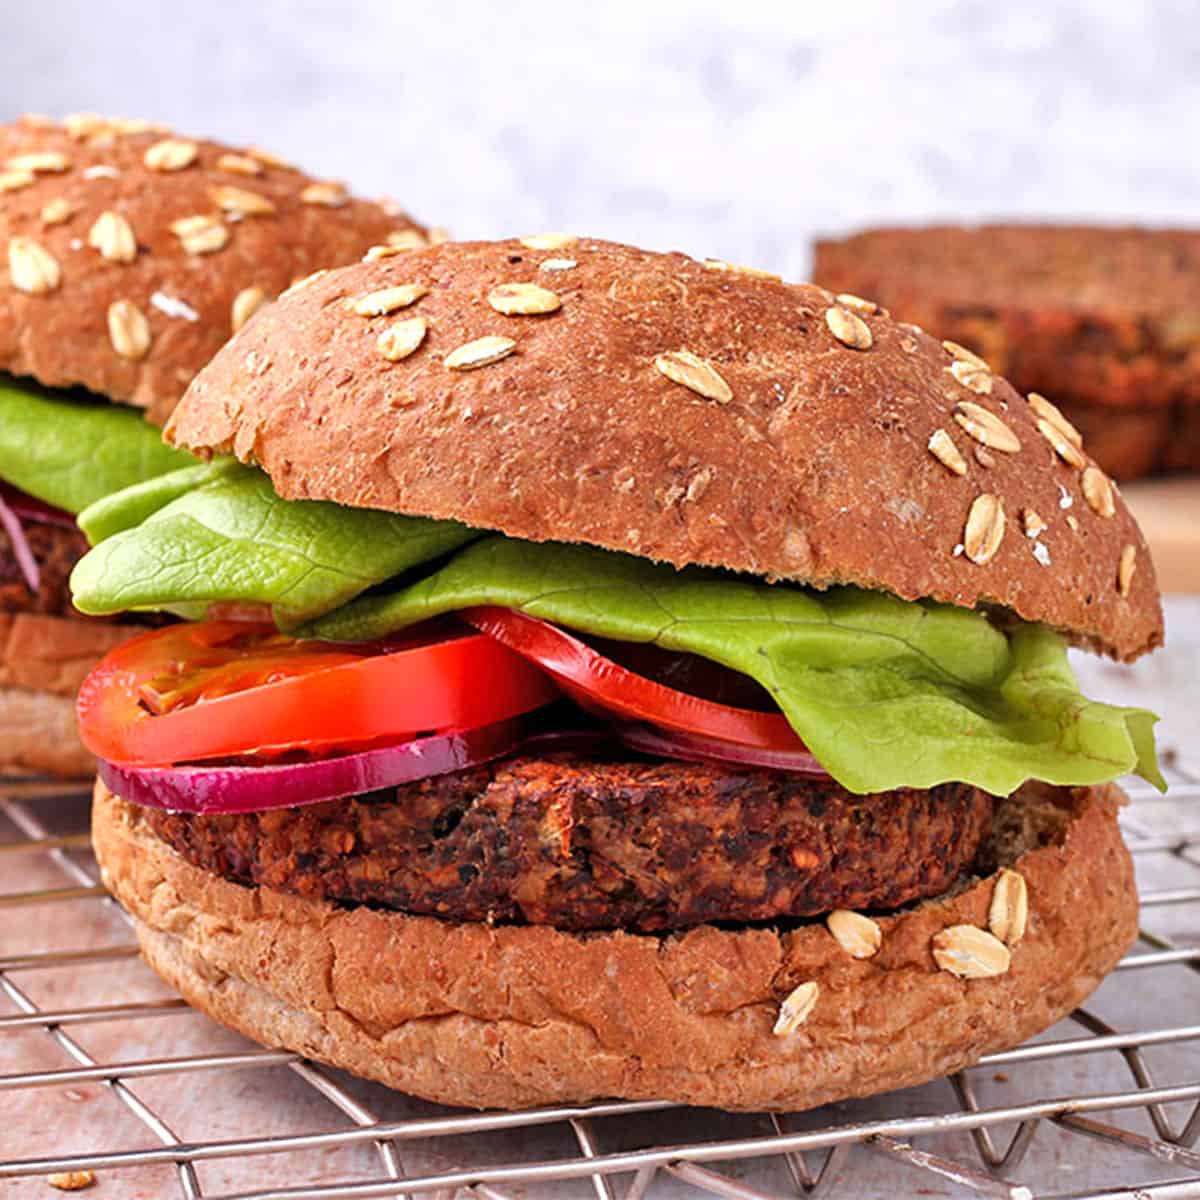 burgers made with tempeh are assembled with bun on bottom and top with red onion, tomato slices and lettuce and placed on a wire rack.